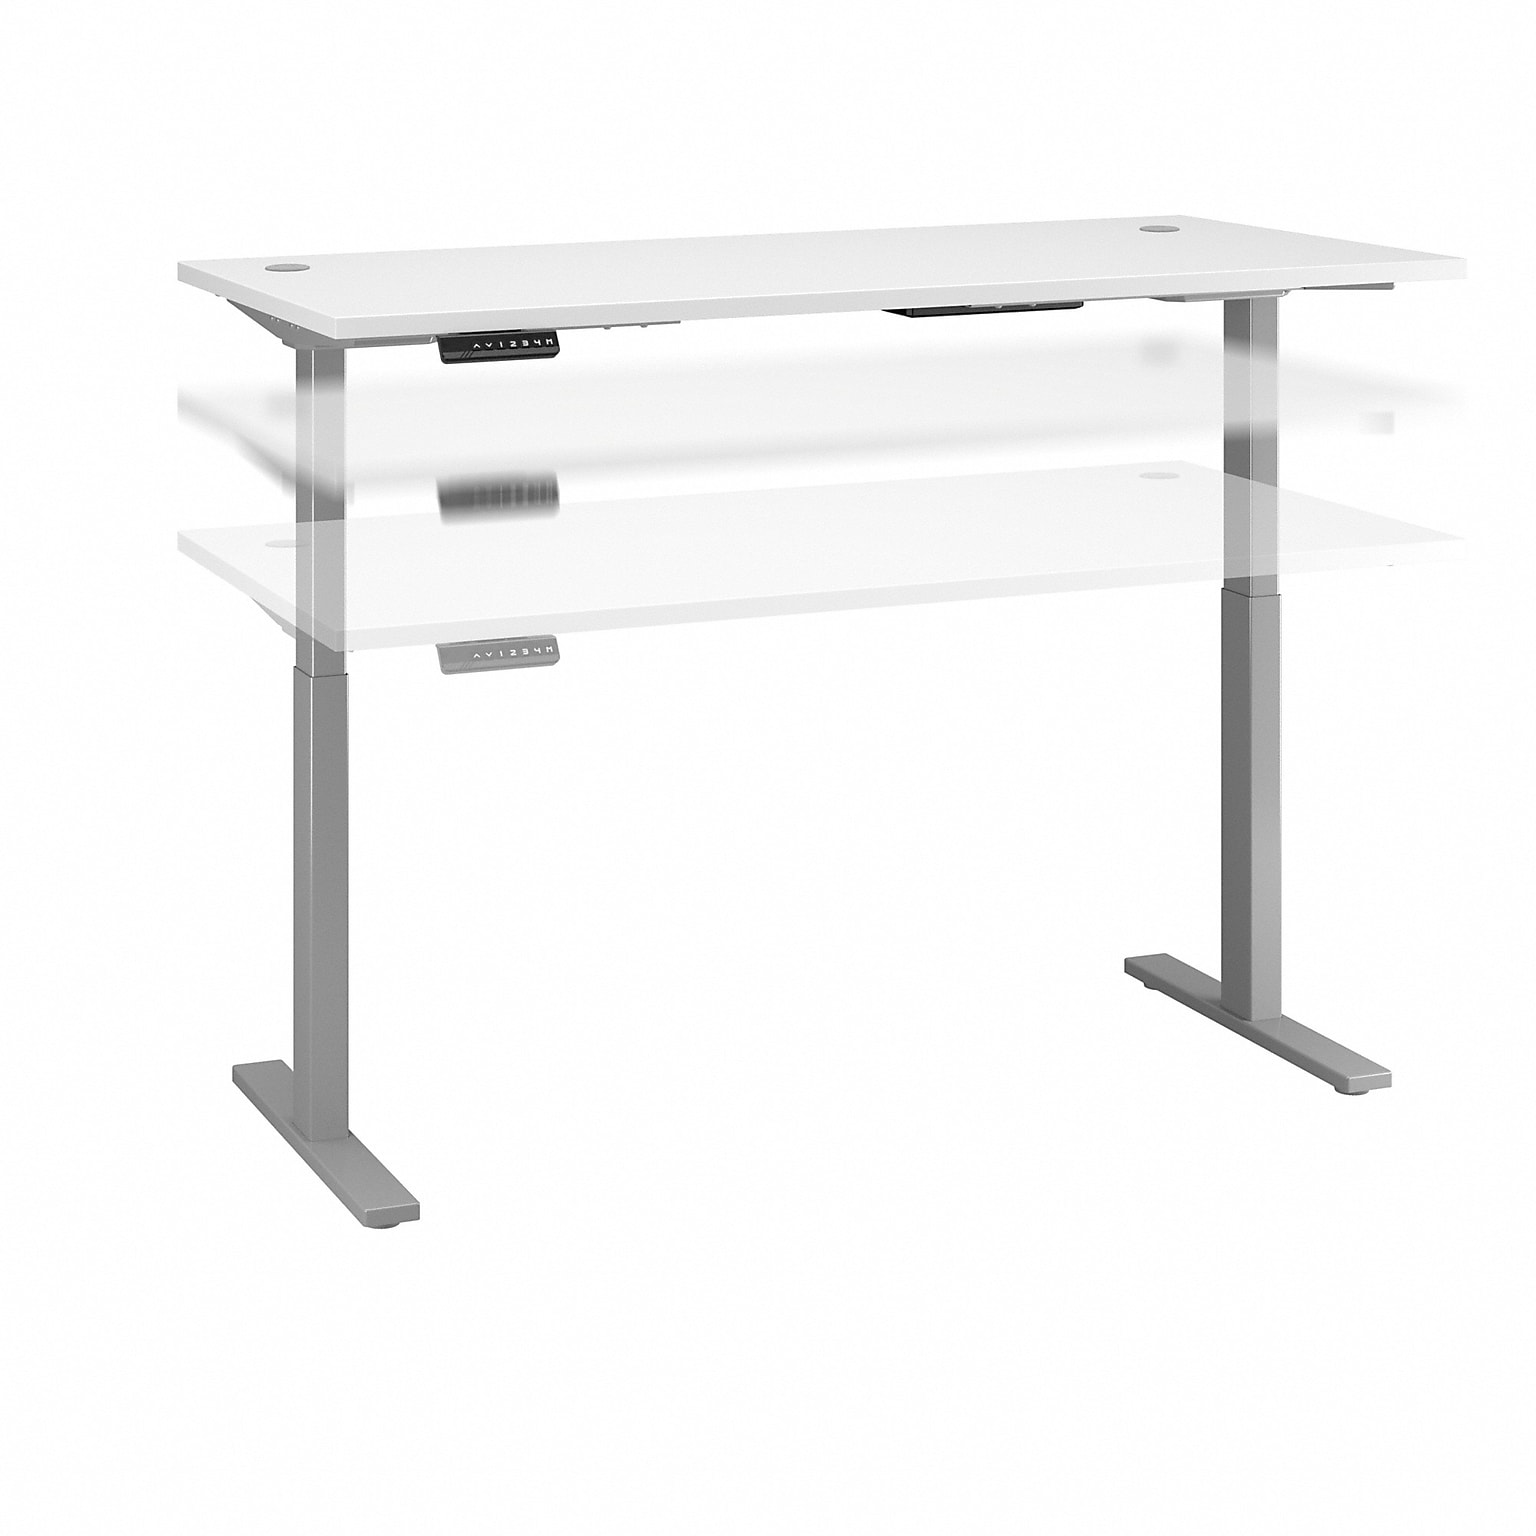 Bush Business Furniture Move 60 Series 72W Electric Height Adjustable Standing Desk, White (M6S7230WHSK)